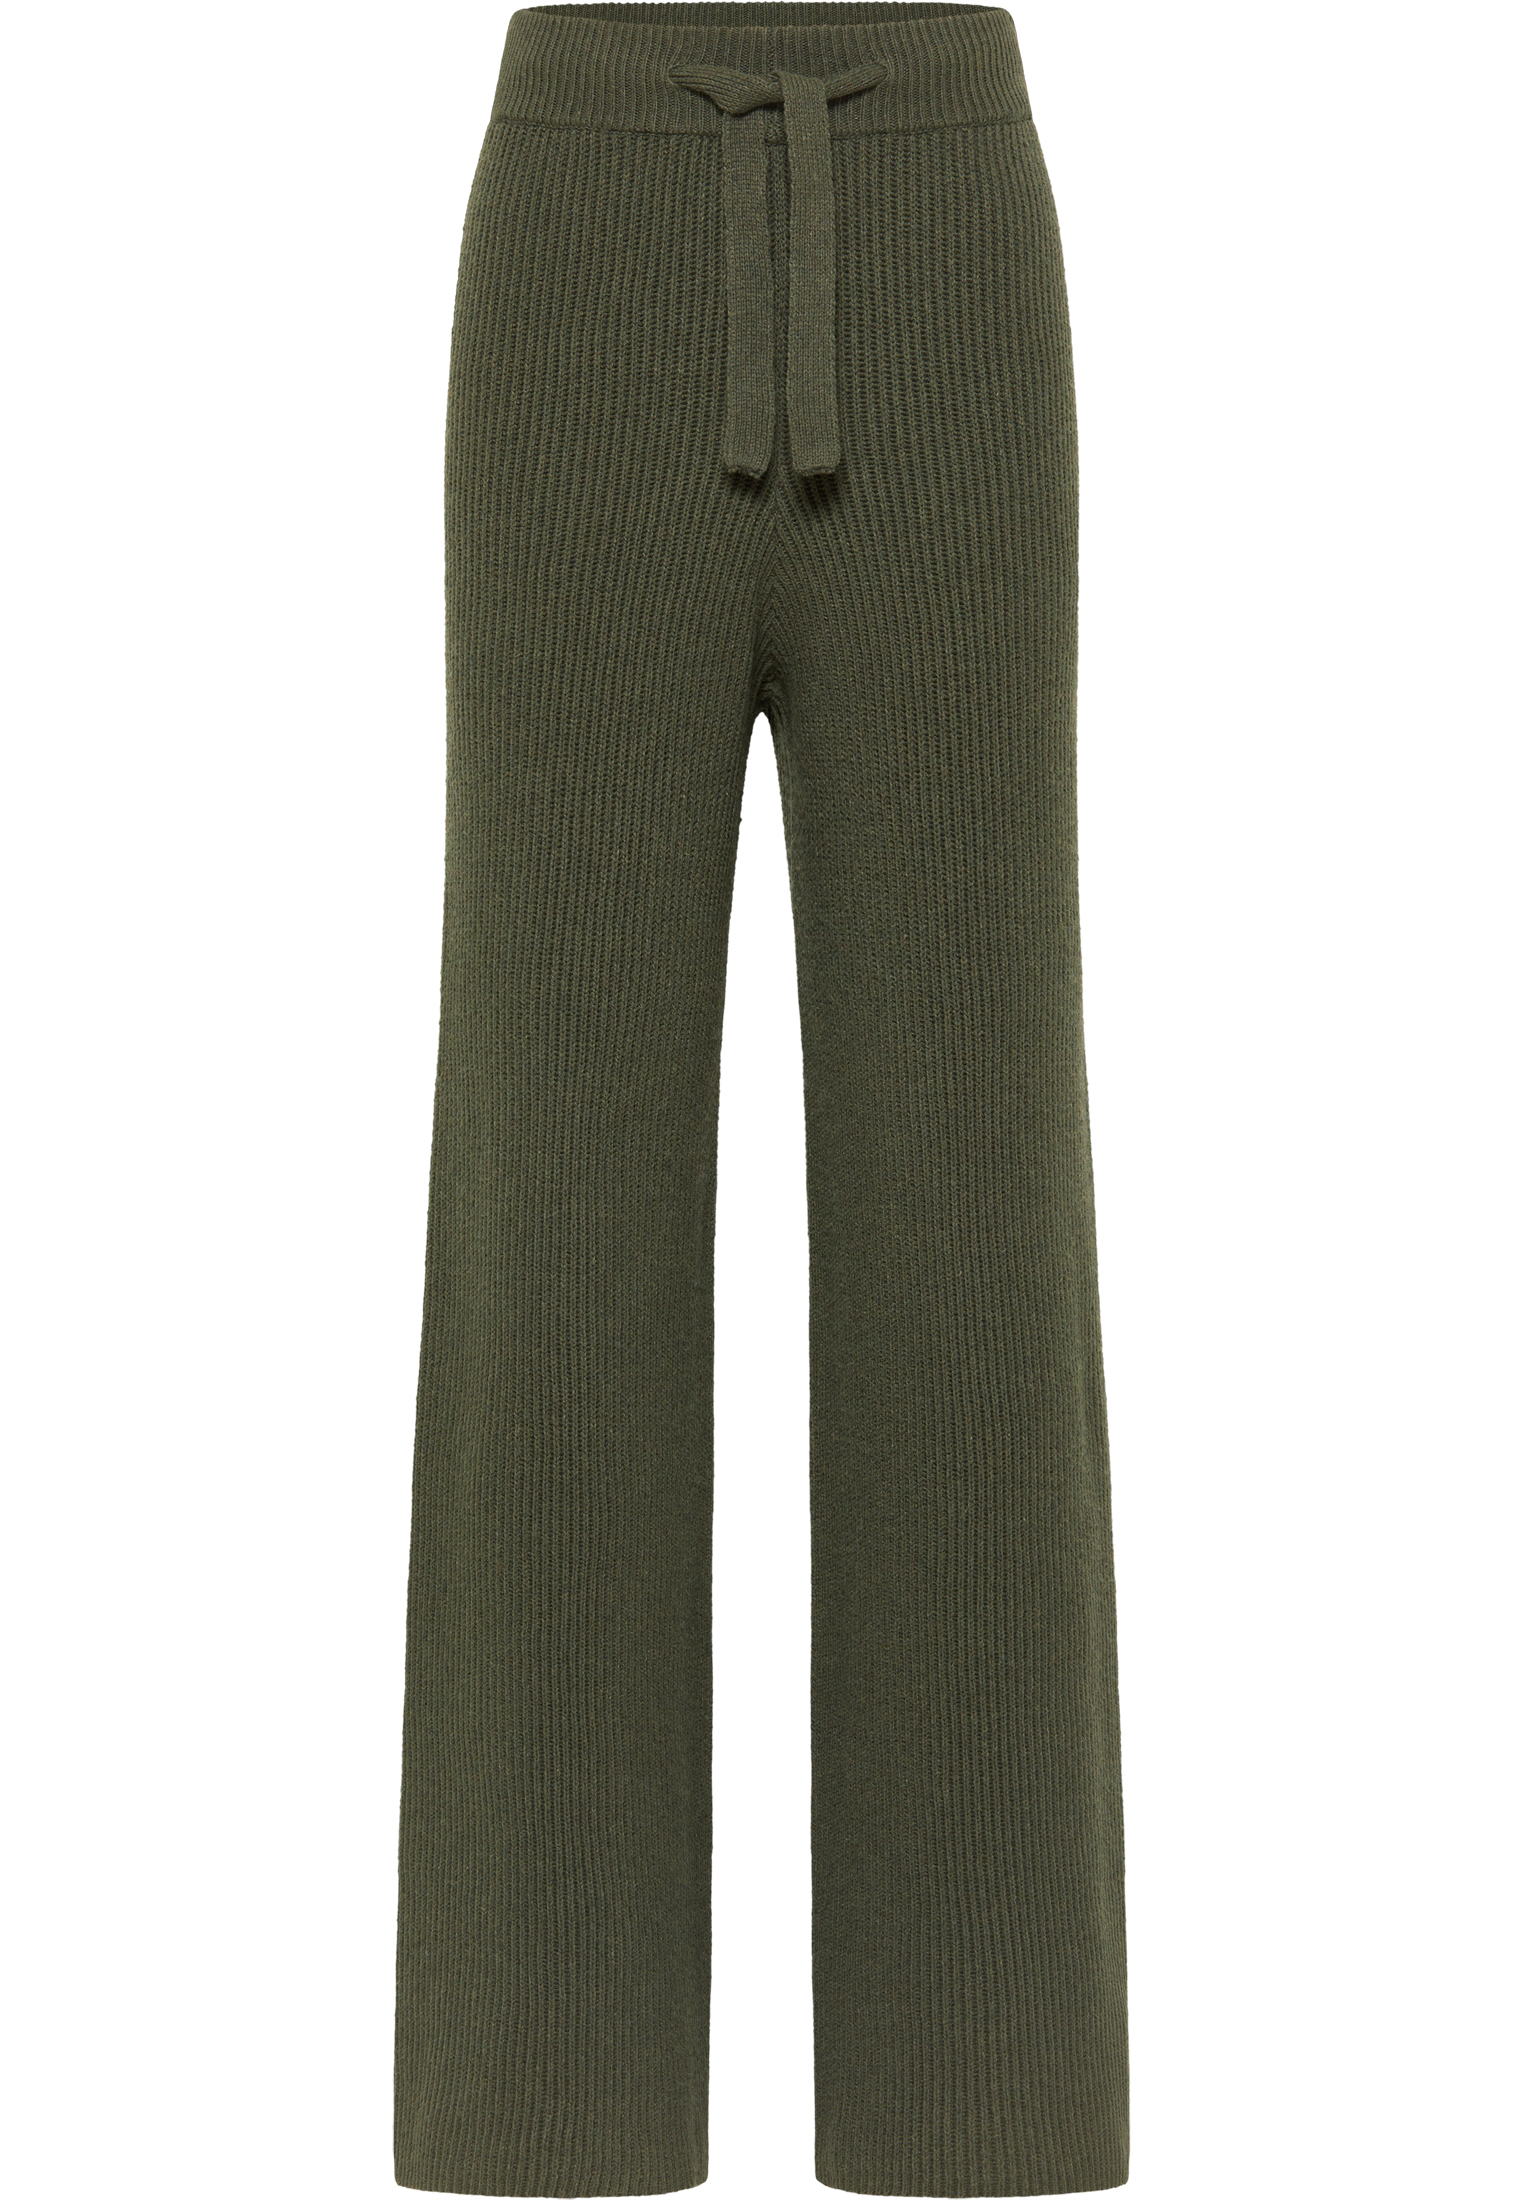 ETERNA cashmere trousers EVEN